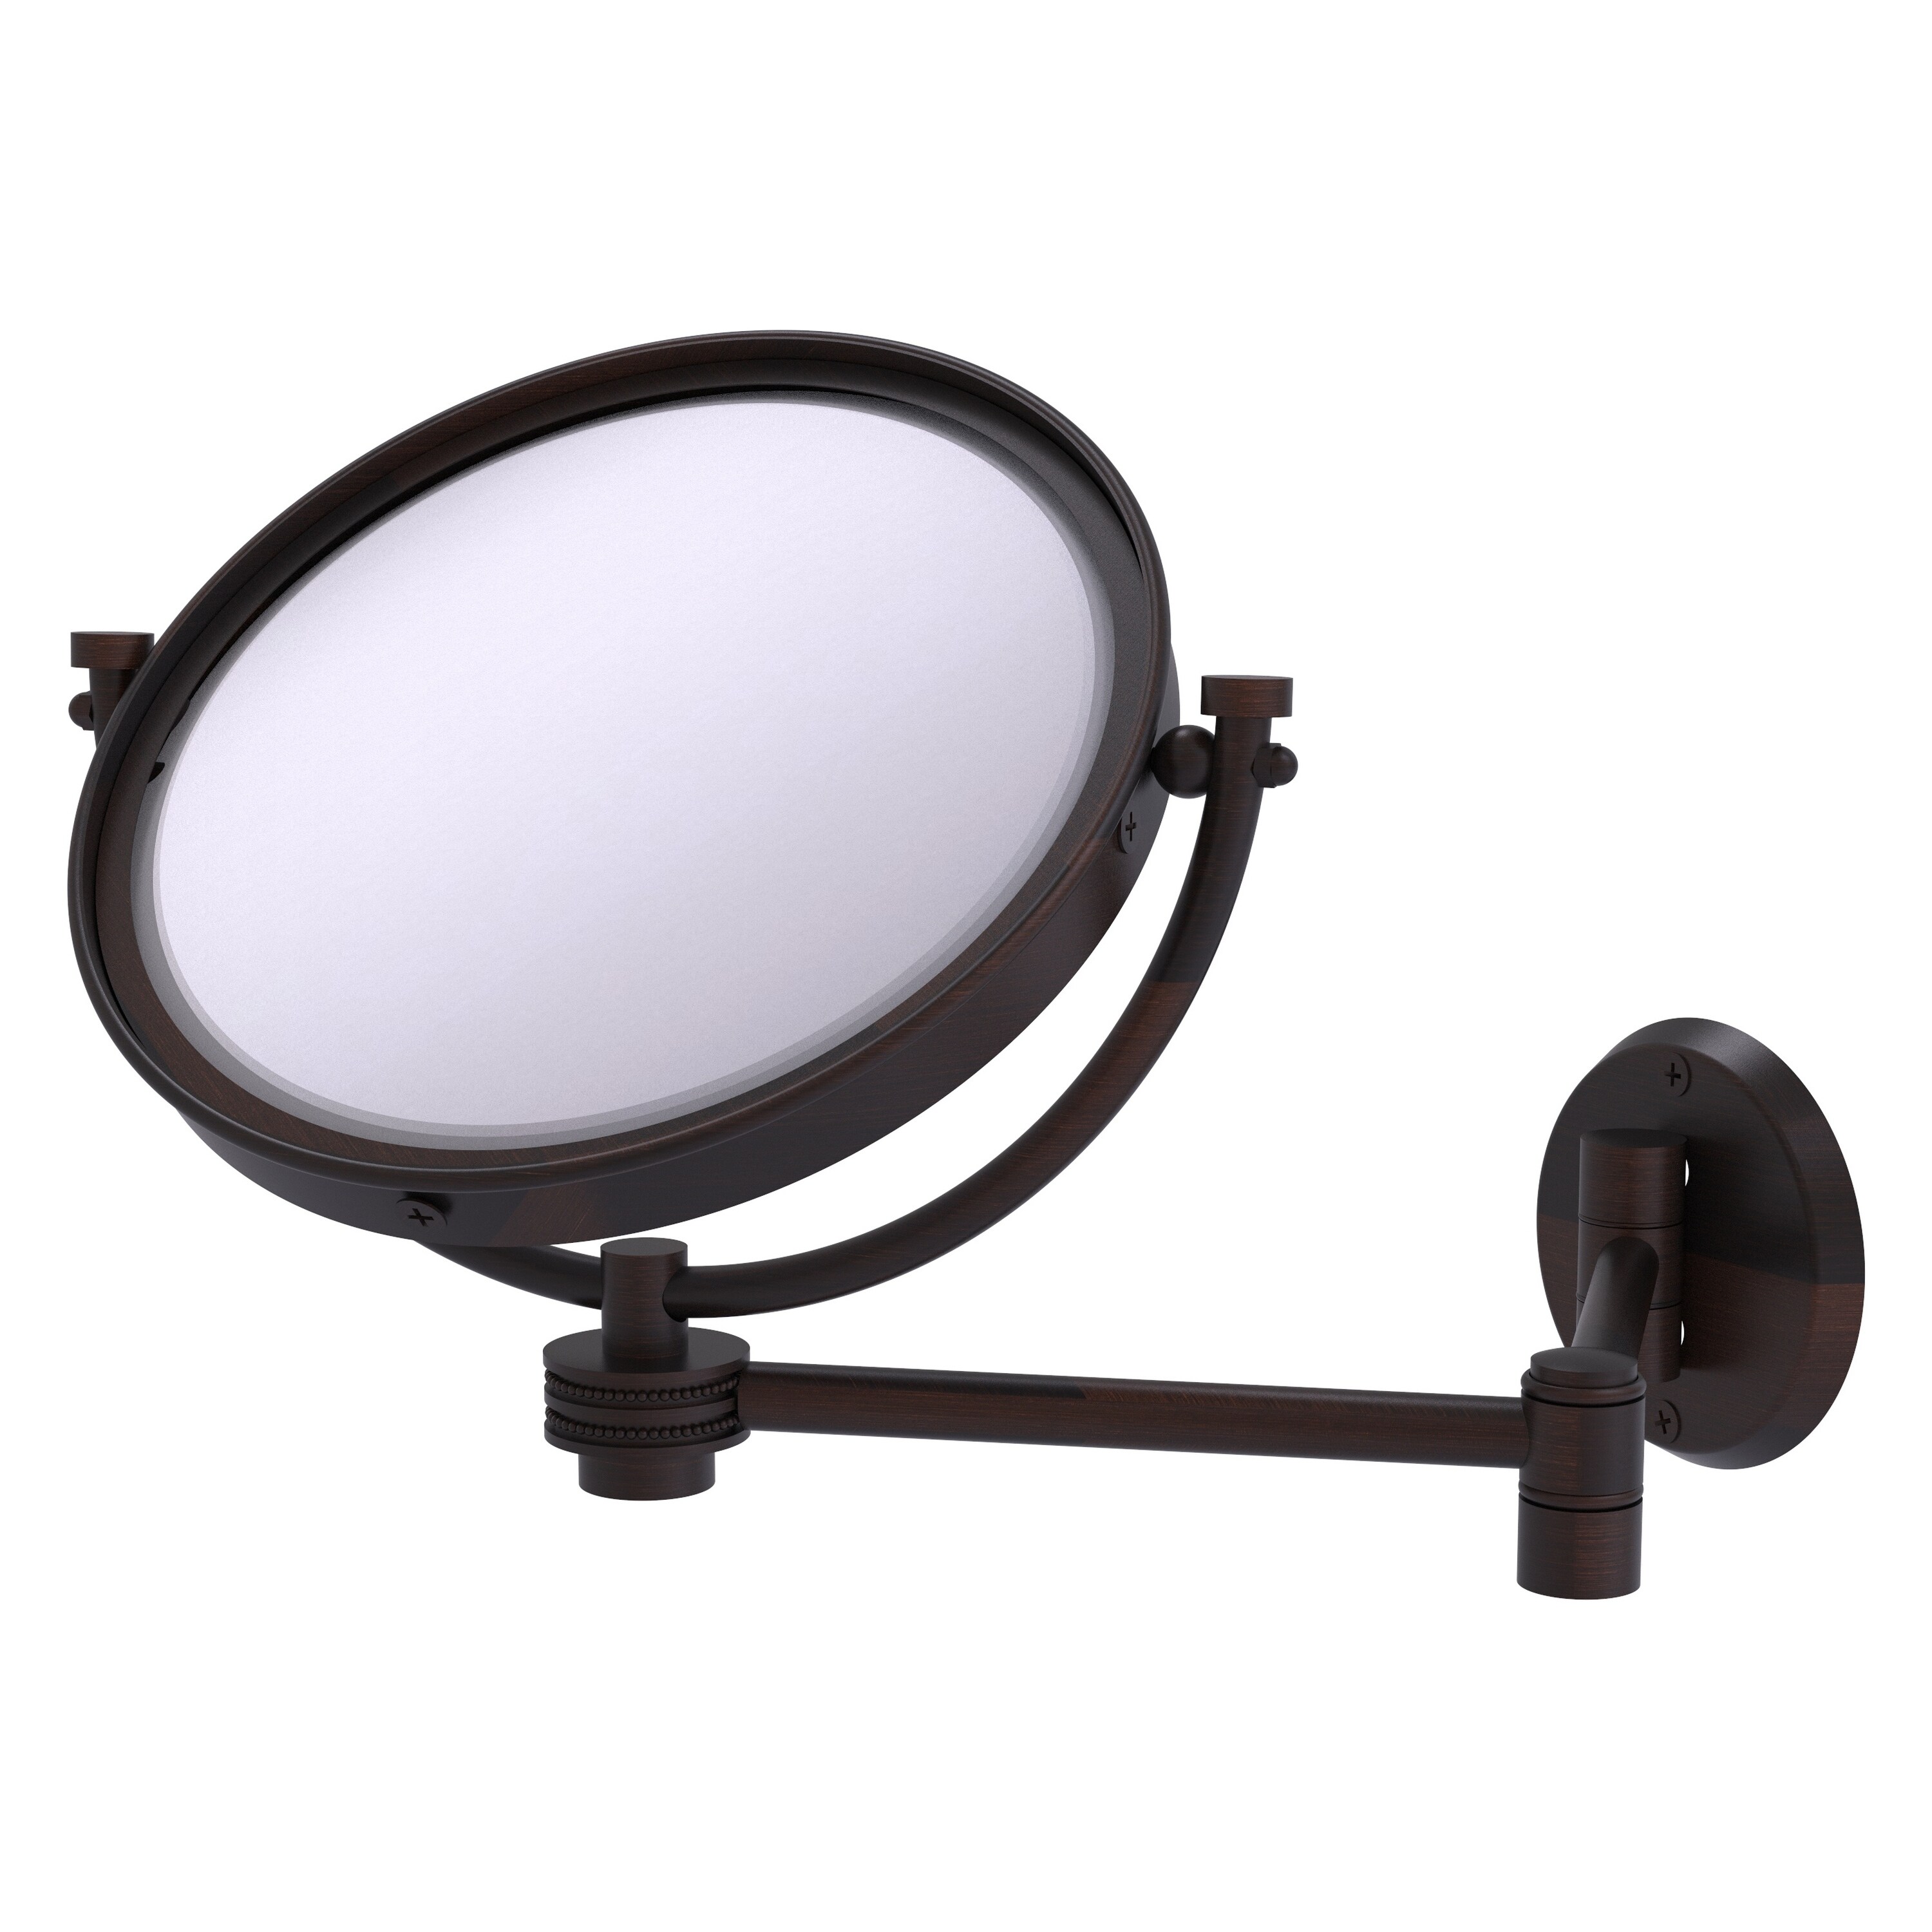 8-in x 10-in Distressed White Double-sided 2X Magnifying Wall-mounted Vanity Mirror | - Allied Brass WM-6D/2X-VB